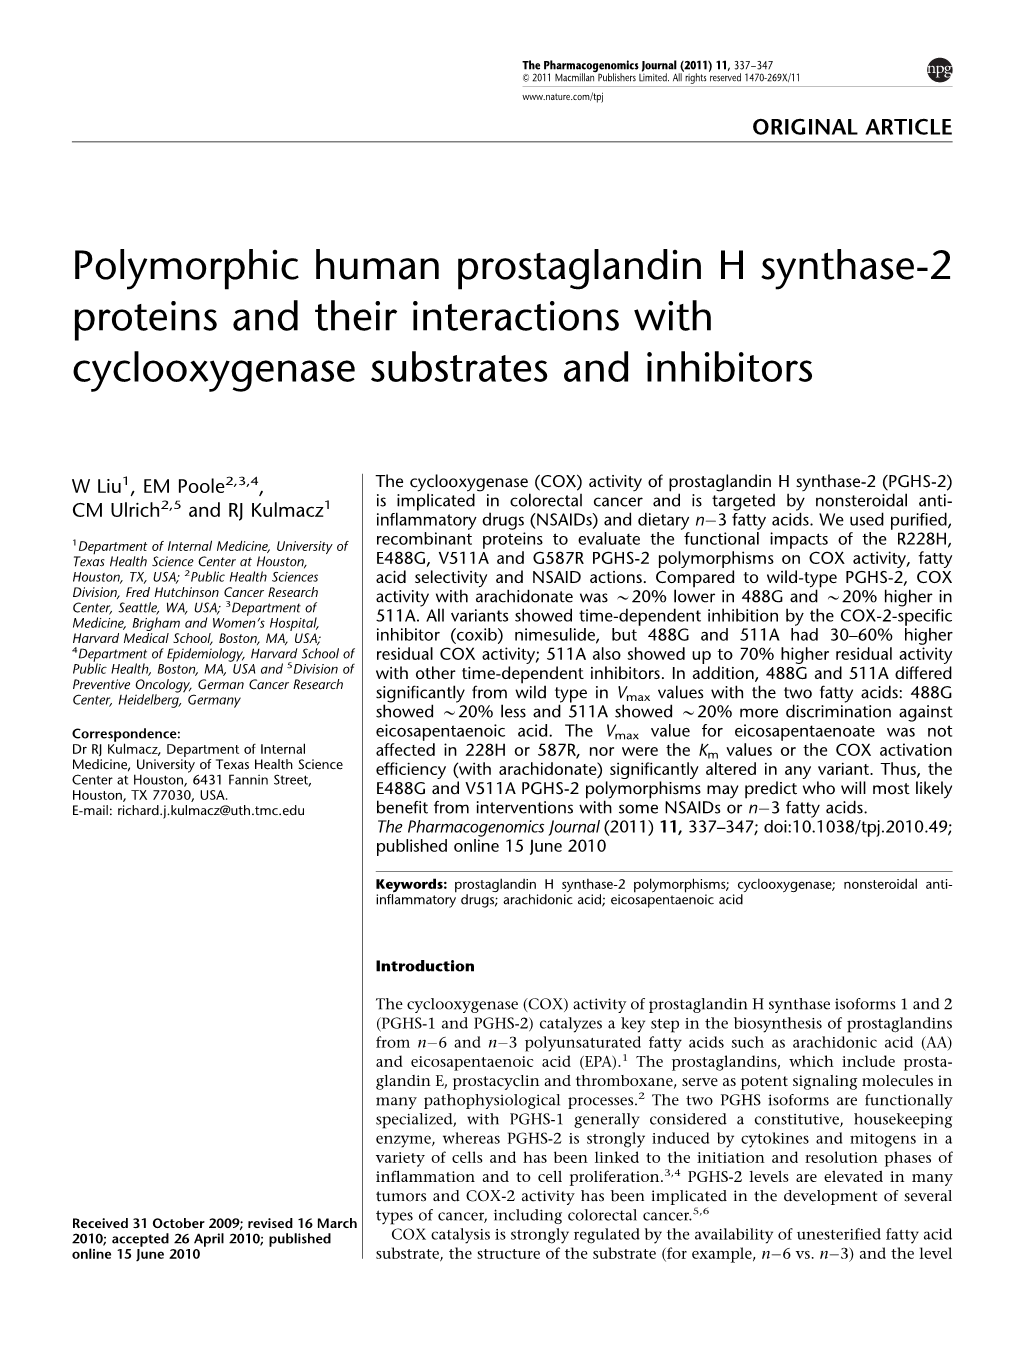 Polymorphic Human Prostaglandin H Synthase-2 Proteins and Their Interactions with Cyclooxygenase Substrates and Inhibitors